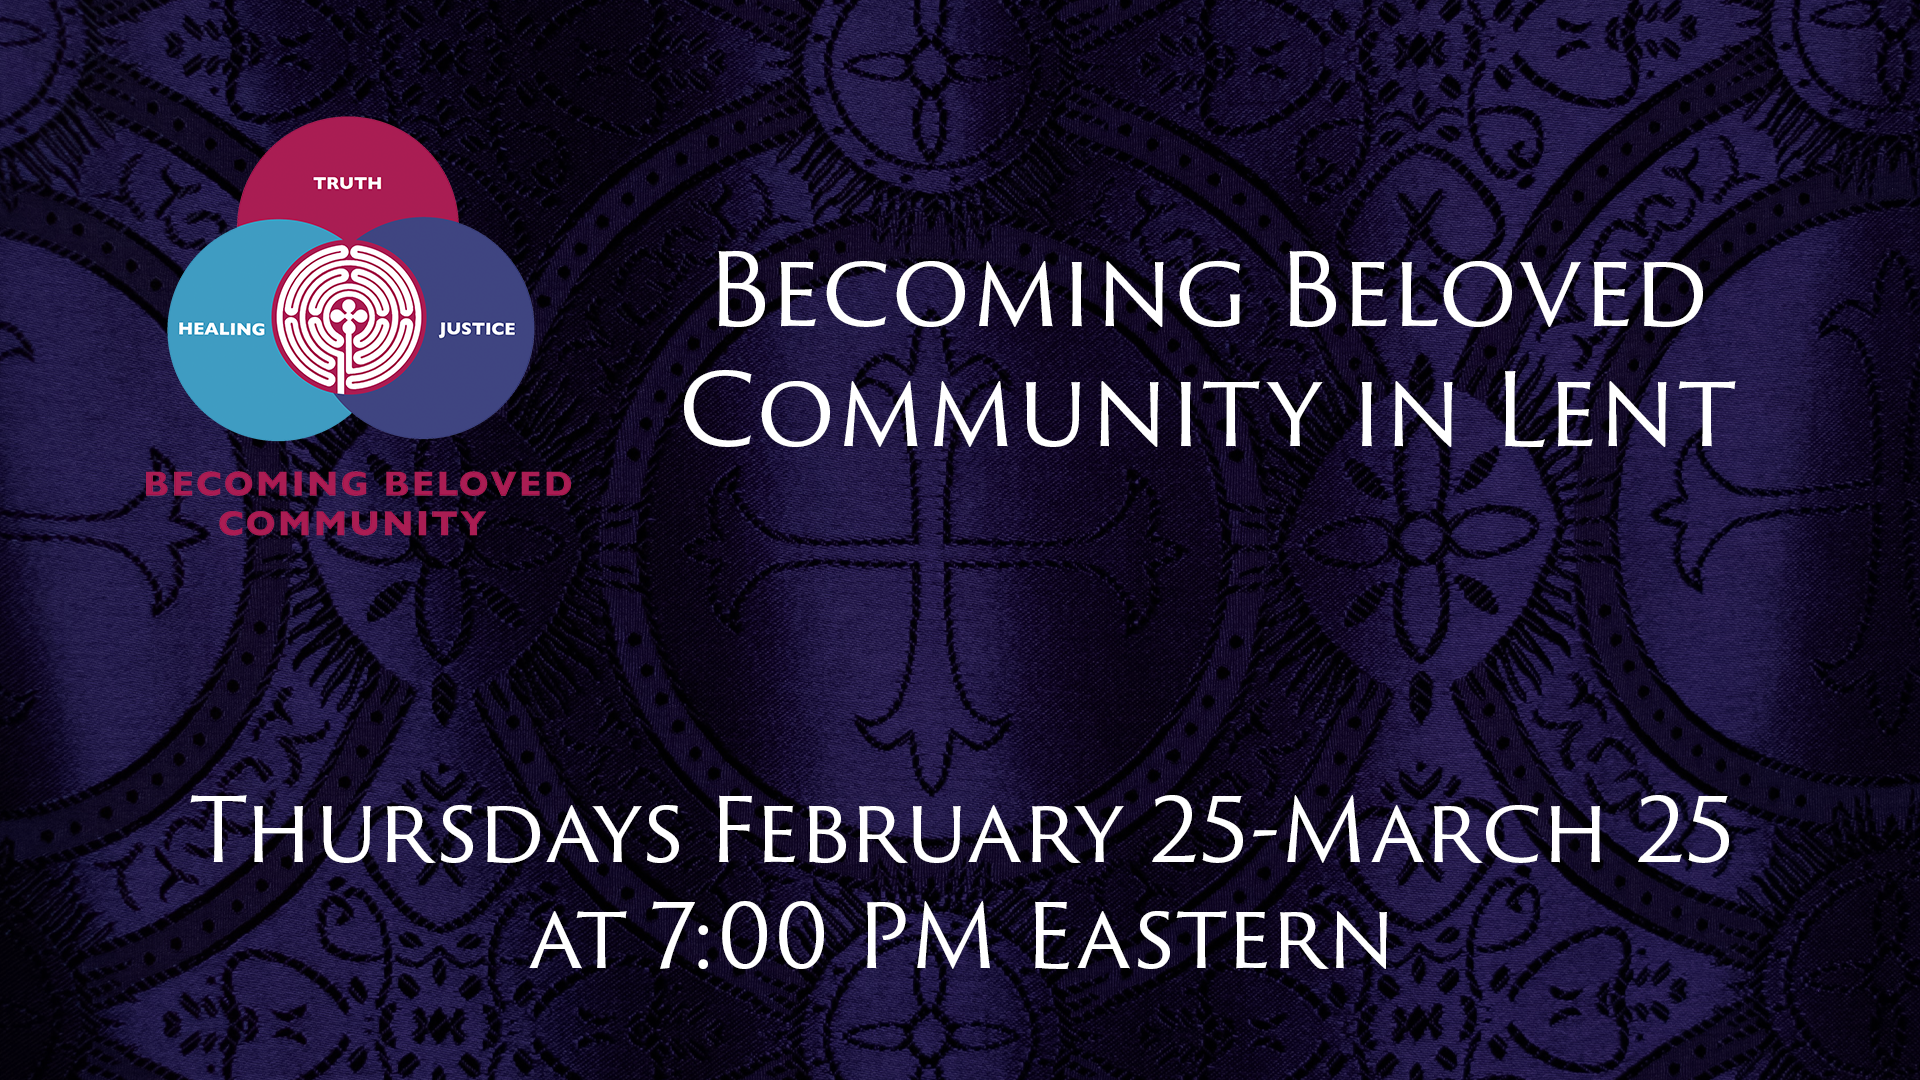 Becoming Beloved Community in Lent